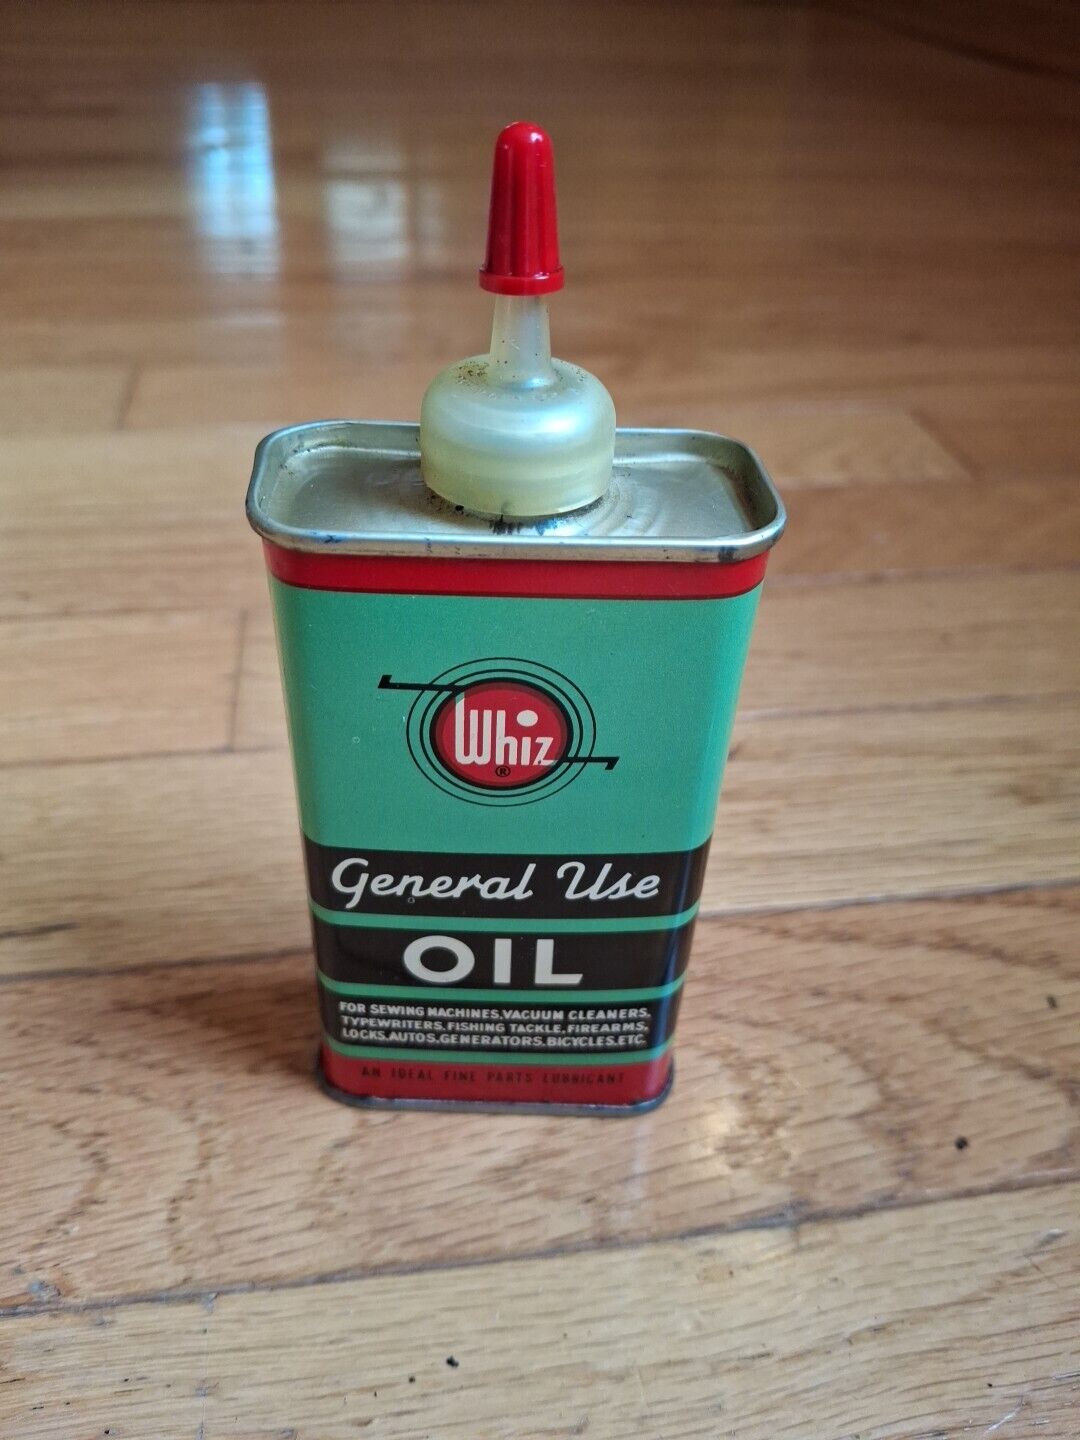 Vintage Whiz Metal General Use Oil Can... Nice Firearms, Bicycle, Sewing Machine